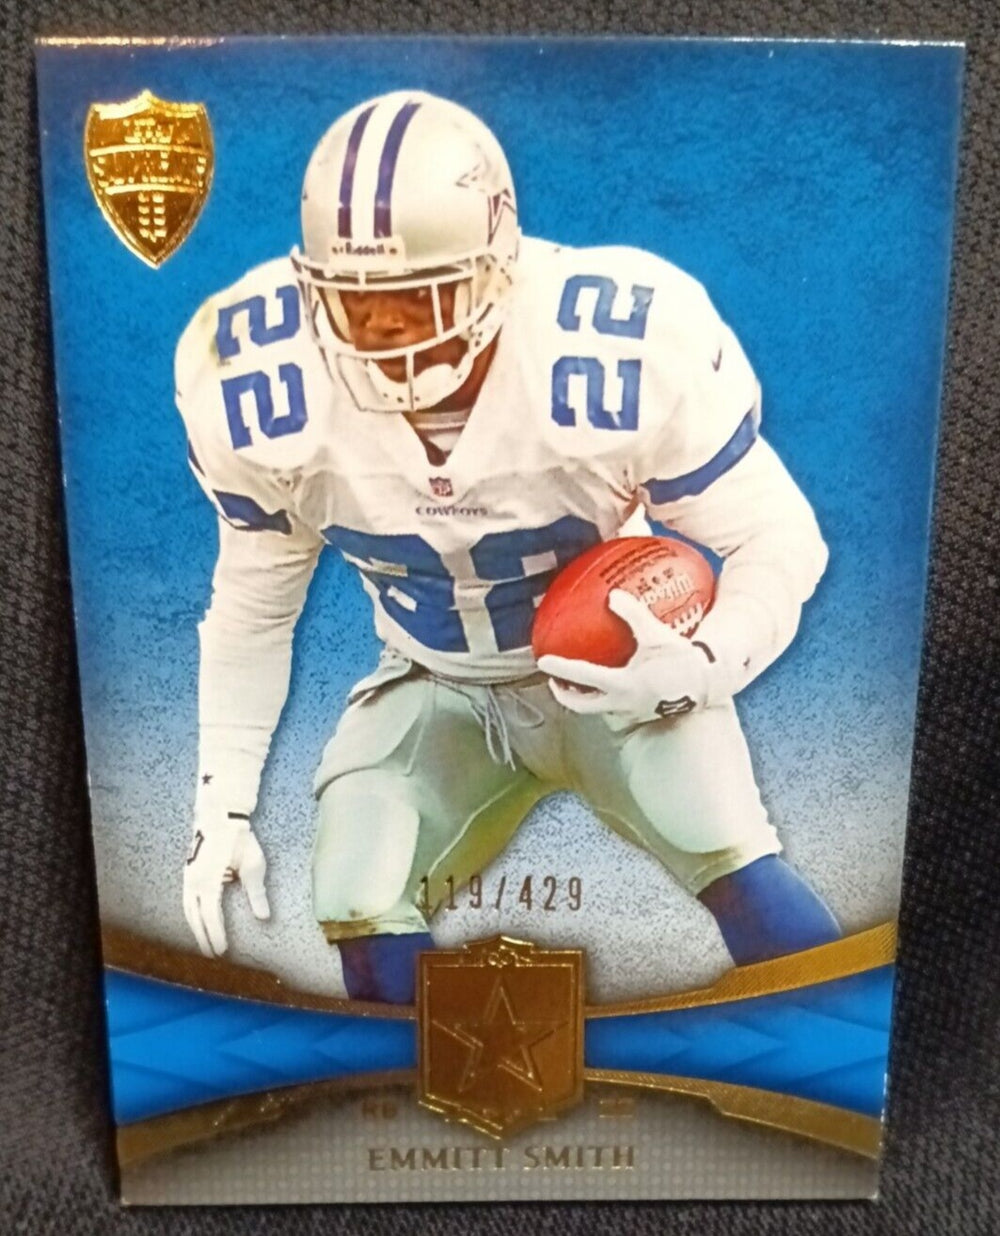 Emmitt Smith 2011 Topps Supreme Blue Series Mint Card #20 Only 429 Made